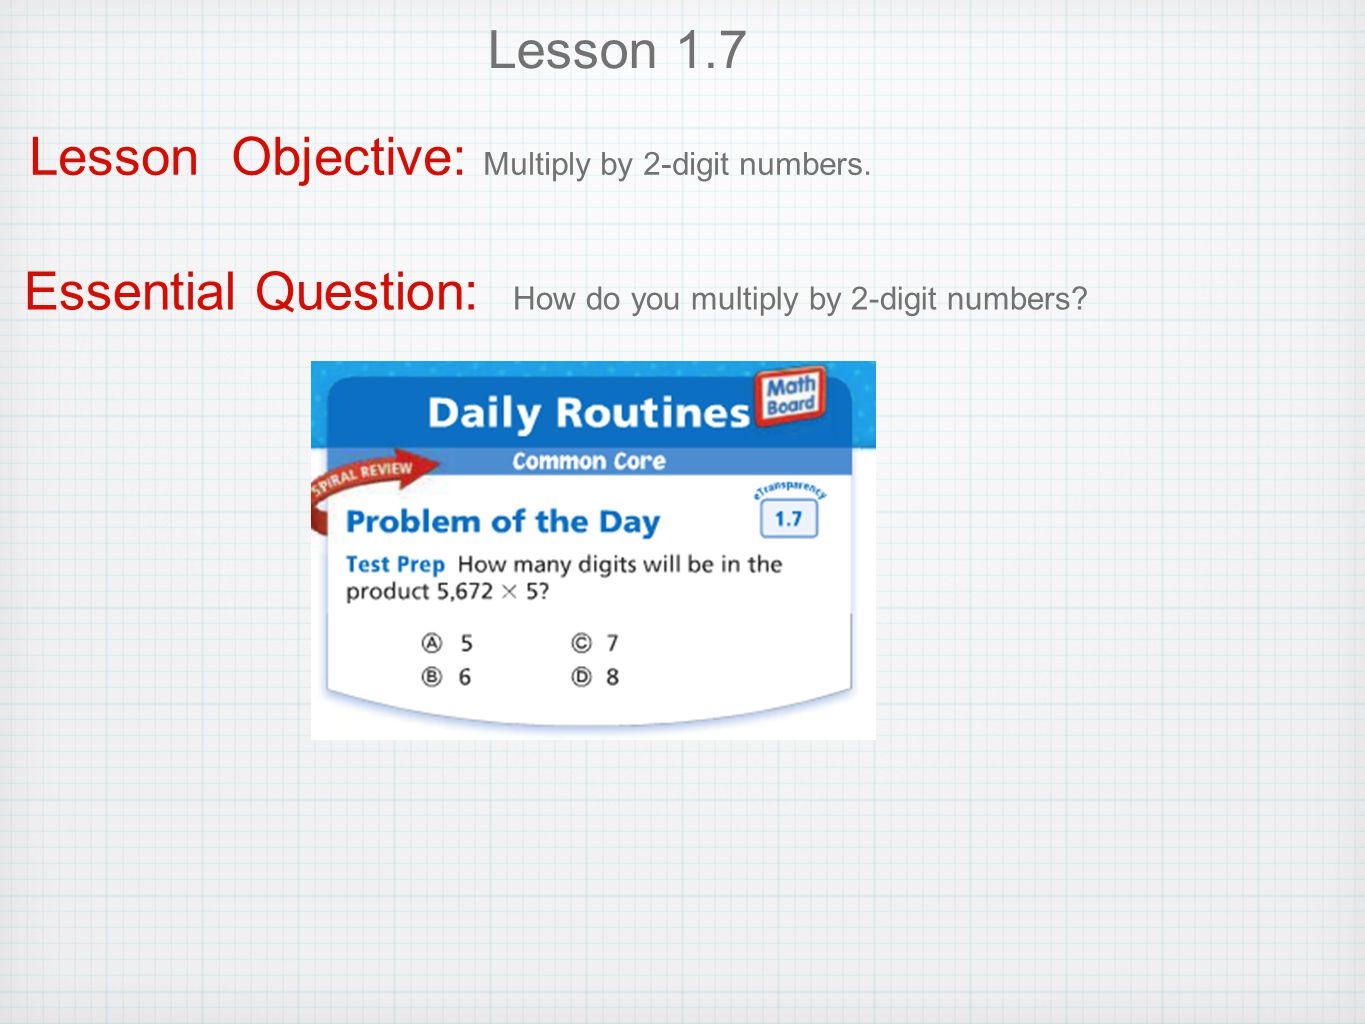 Lesson 1.7 Lesson Objective: Multiply by 2-digit numbers.